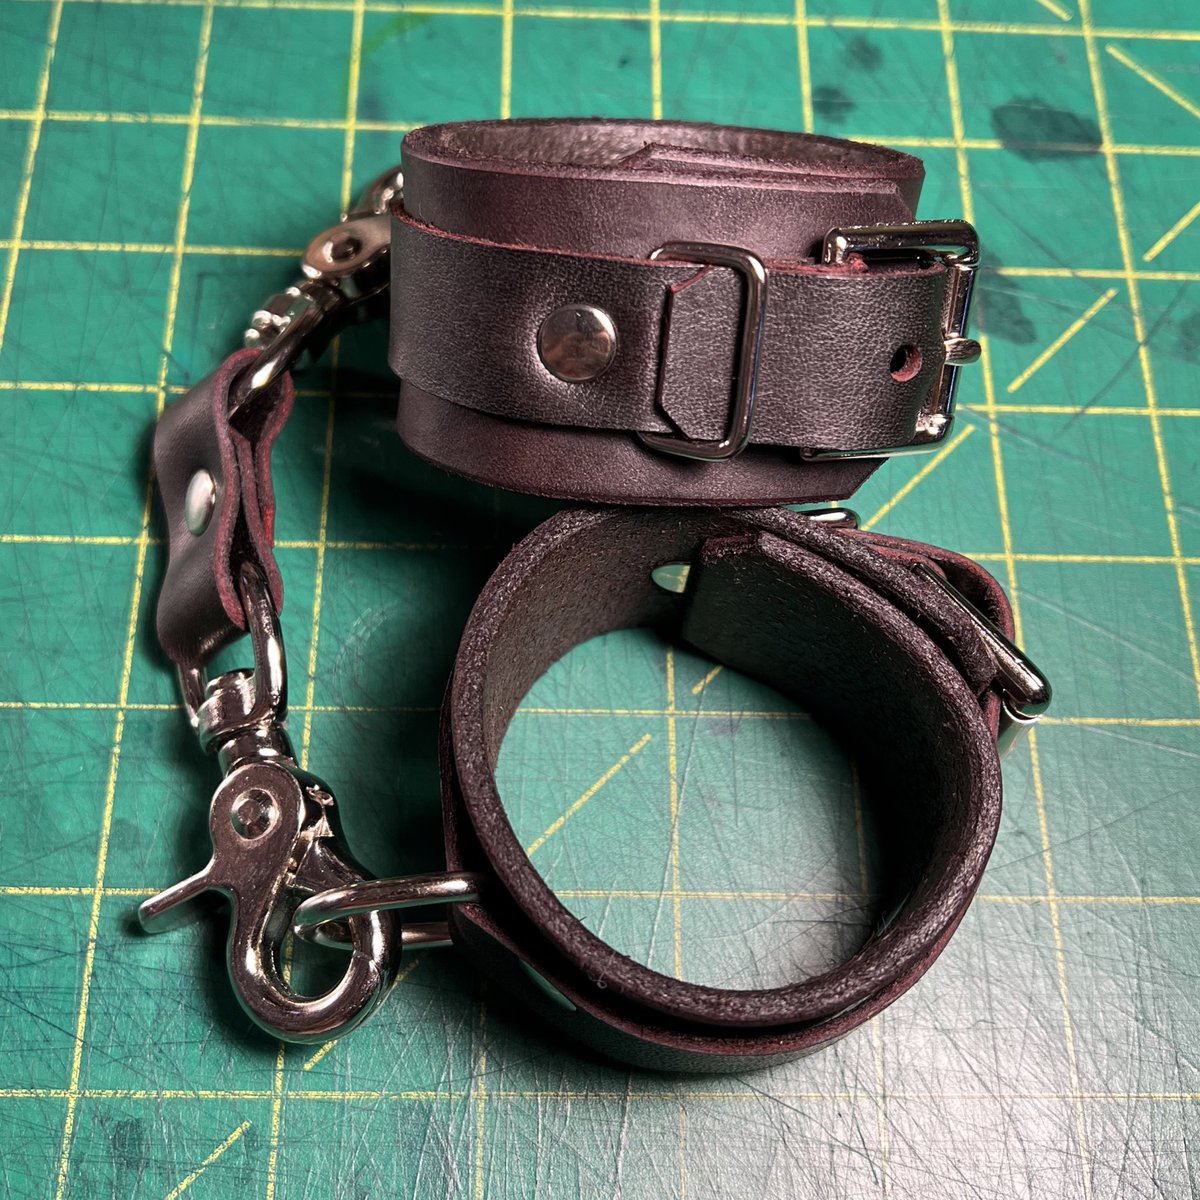 Just listed two pairs of heavy bondage cuffs made from black and brown leather with red edge dye, fit 9' and 6'